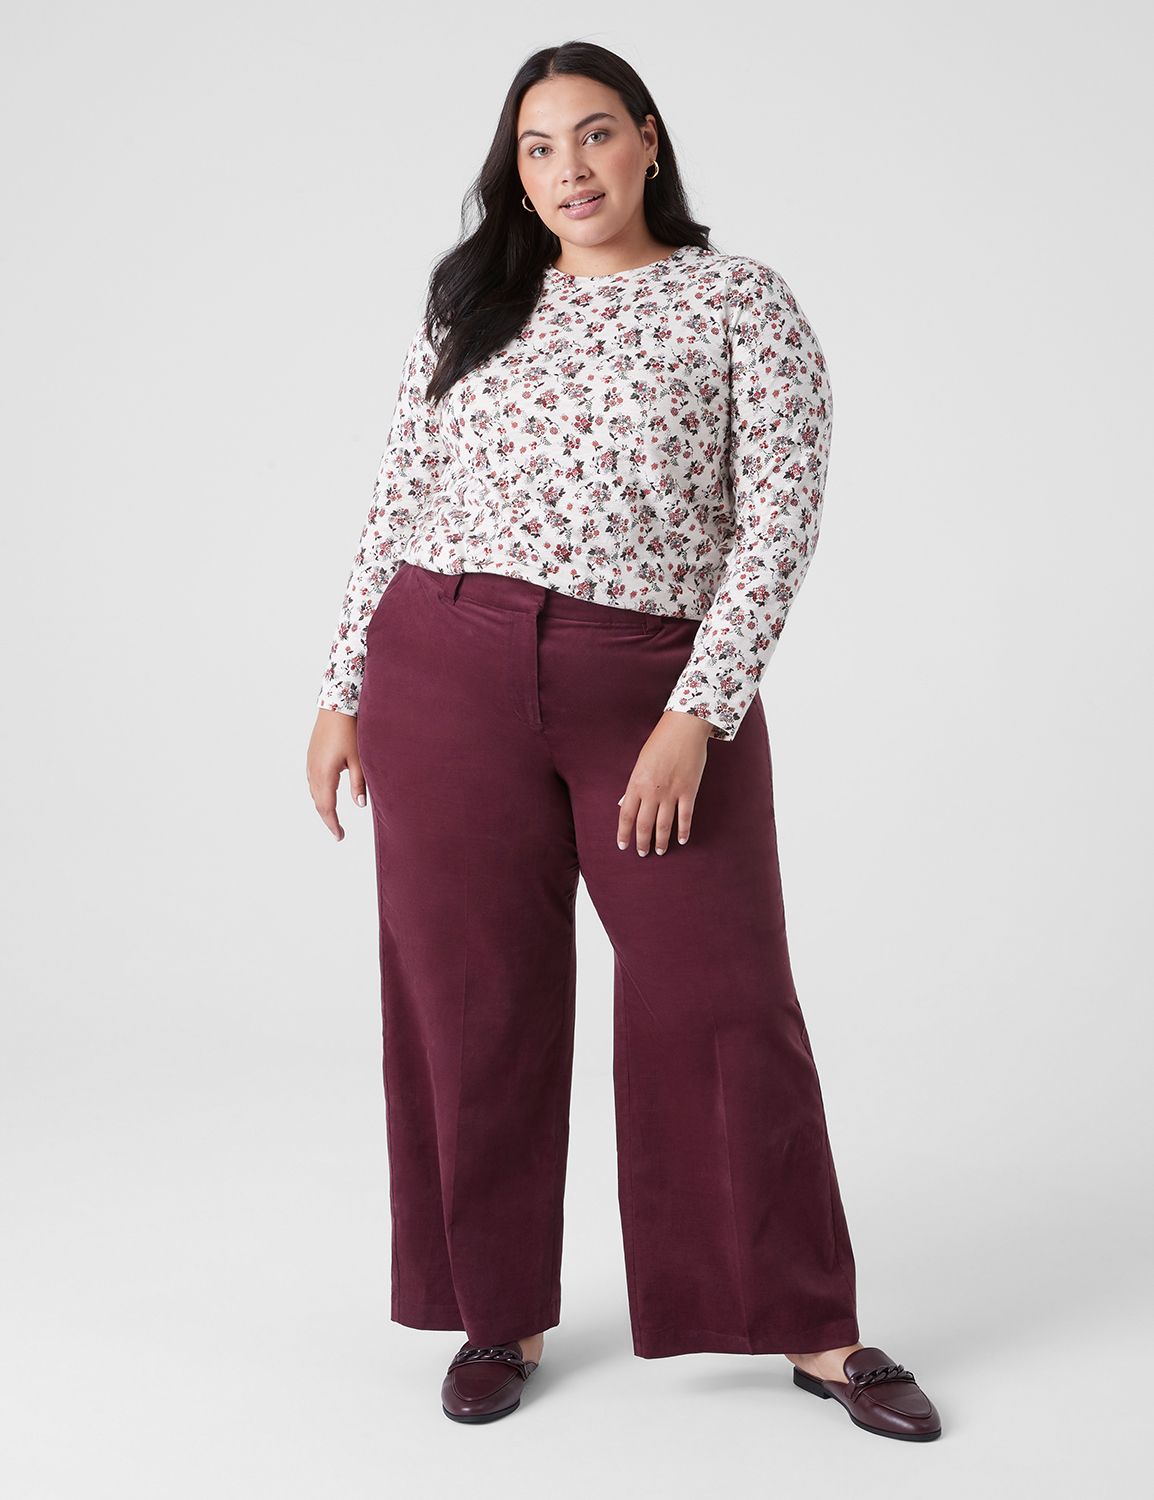 Plus Size Women Stretch Lace-Up Top and Pleated Wide-Leg Pants Two-Piece  Set - The Little Connection